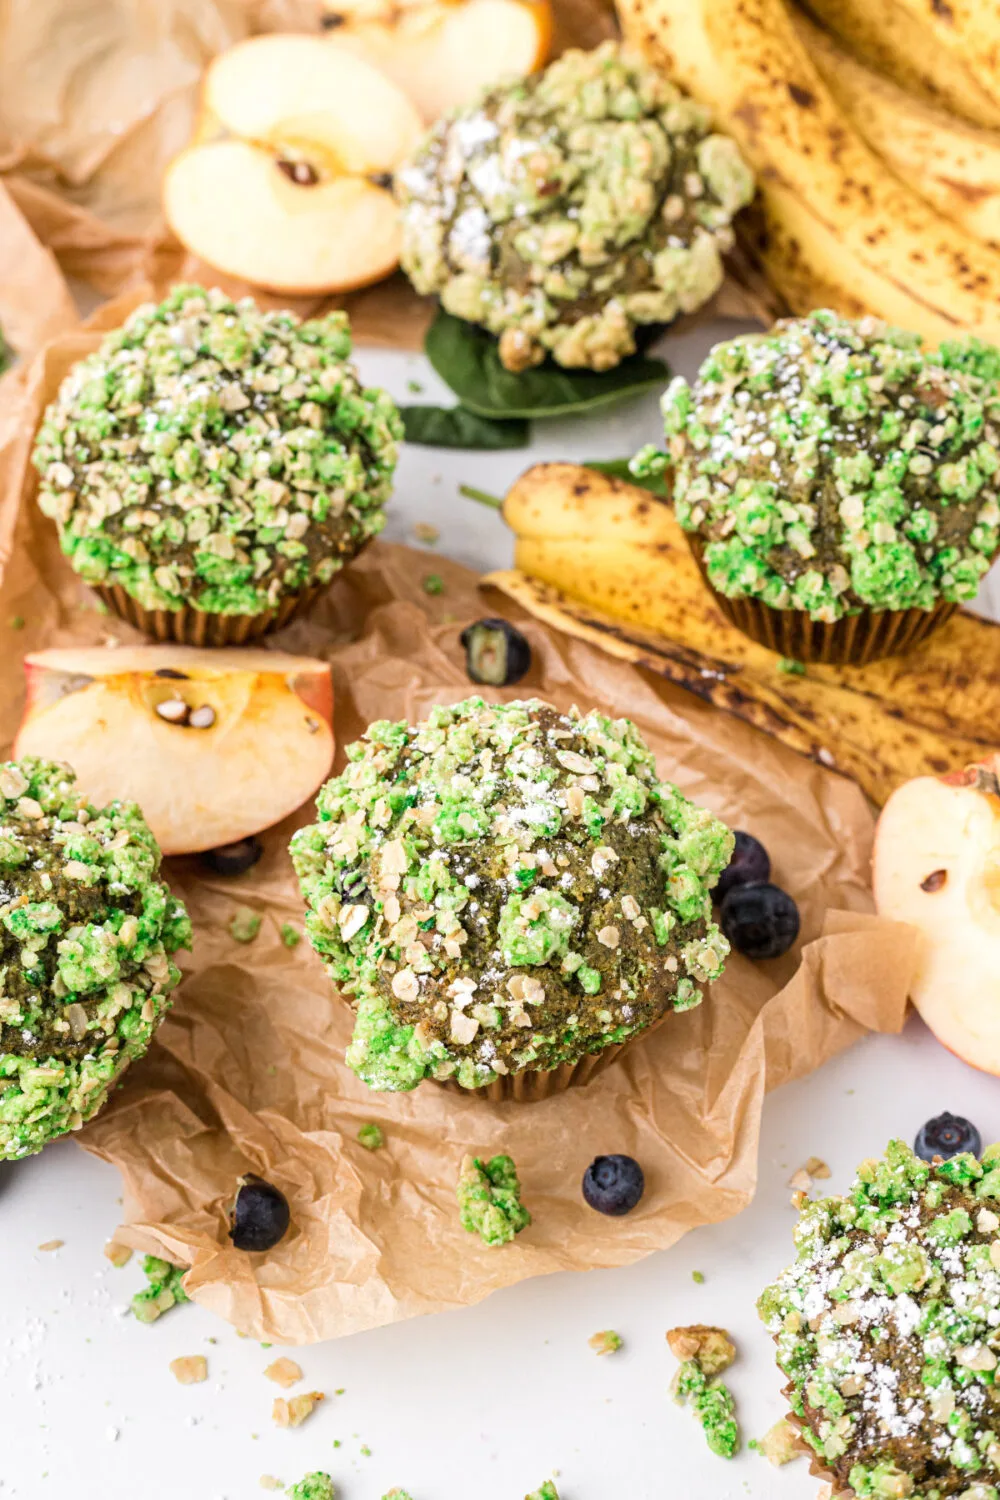 Muffins with green crumble to look like mold for Halloween or April Fool's Day.